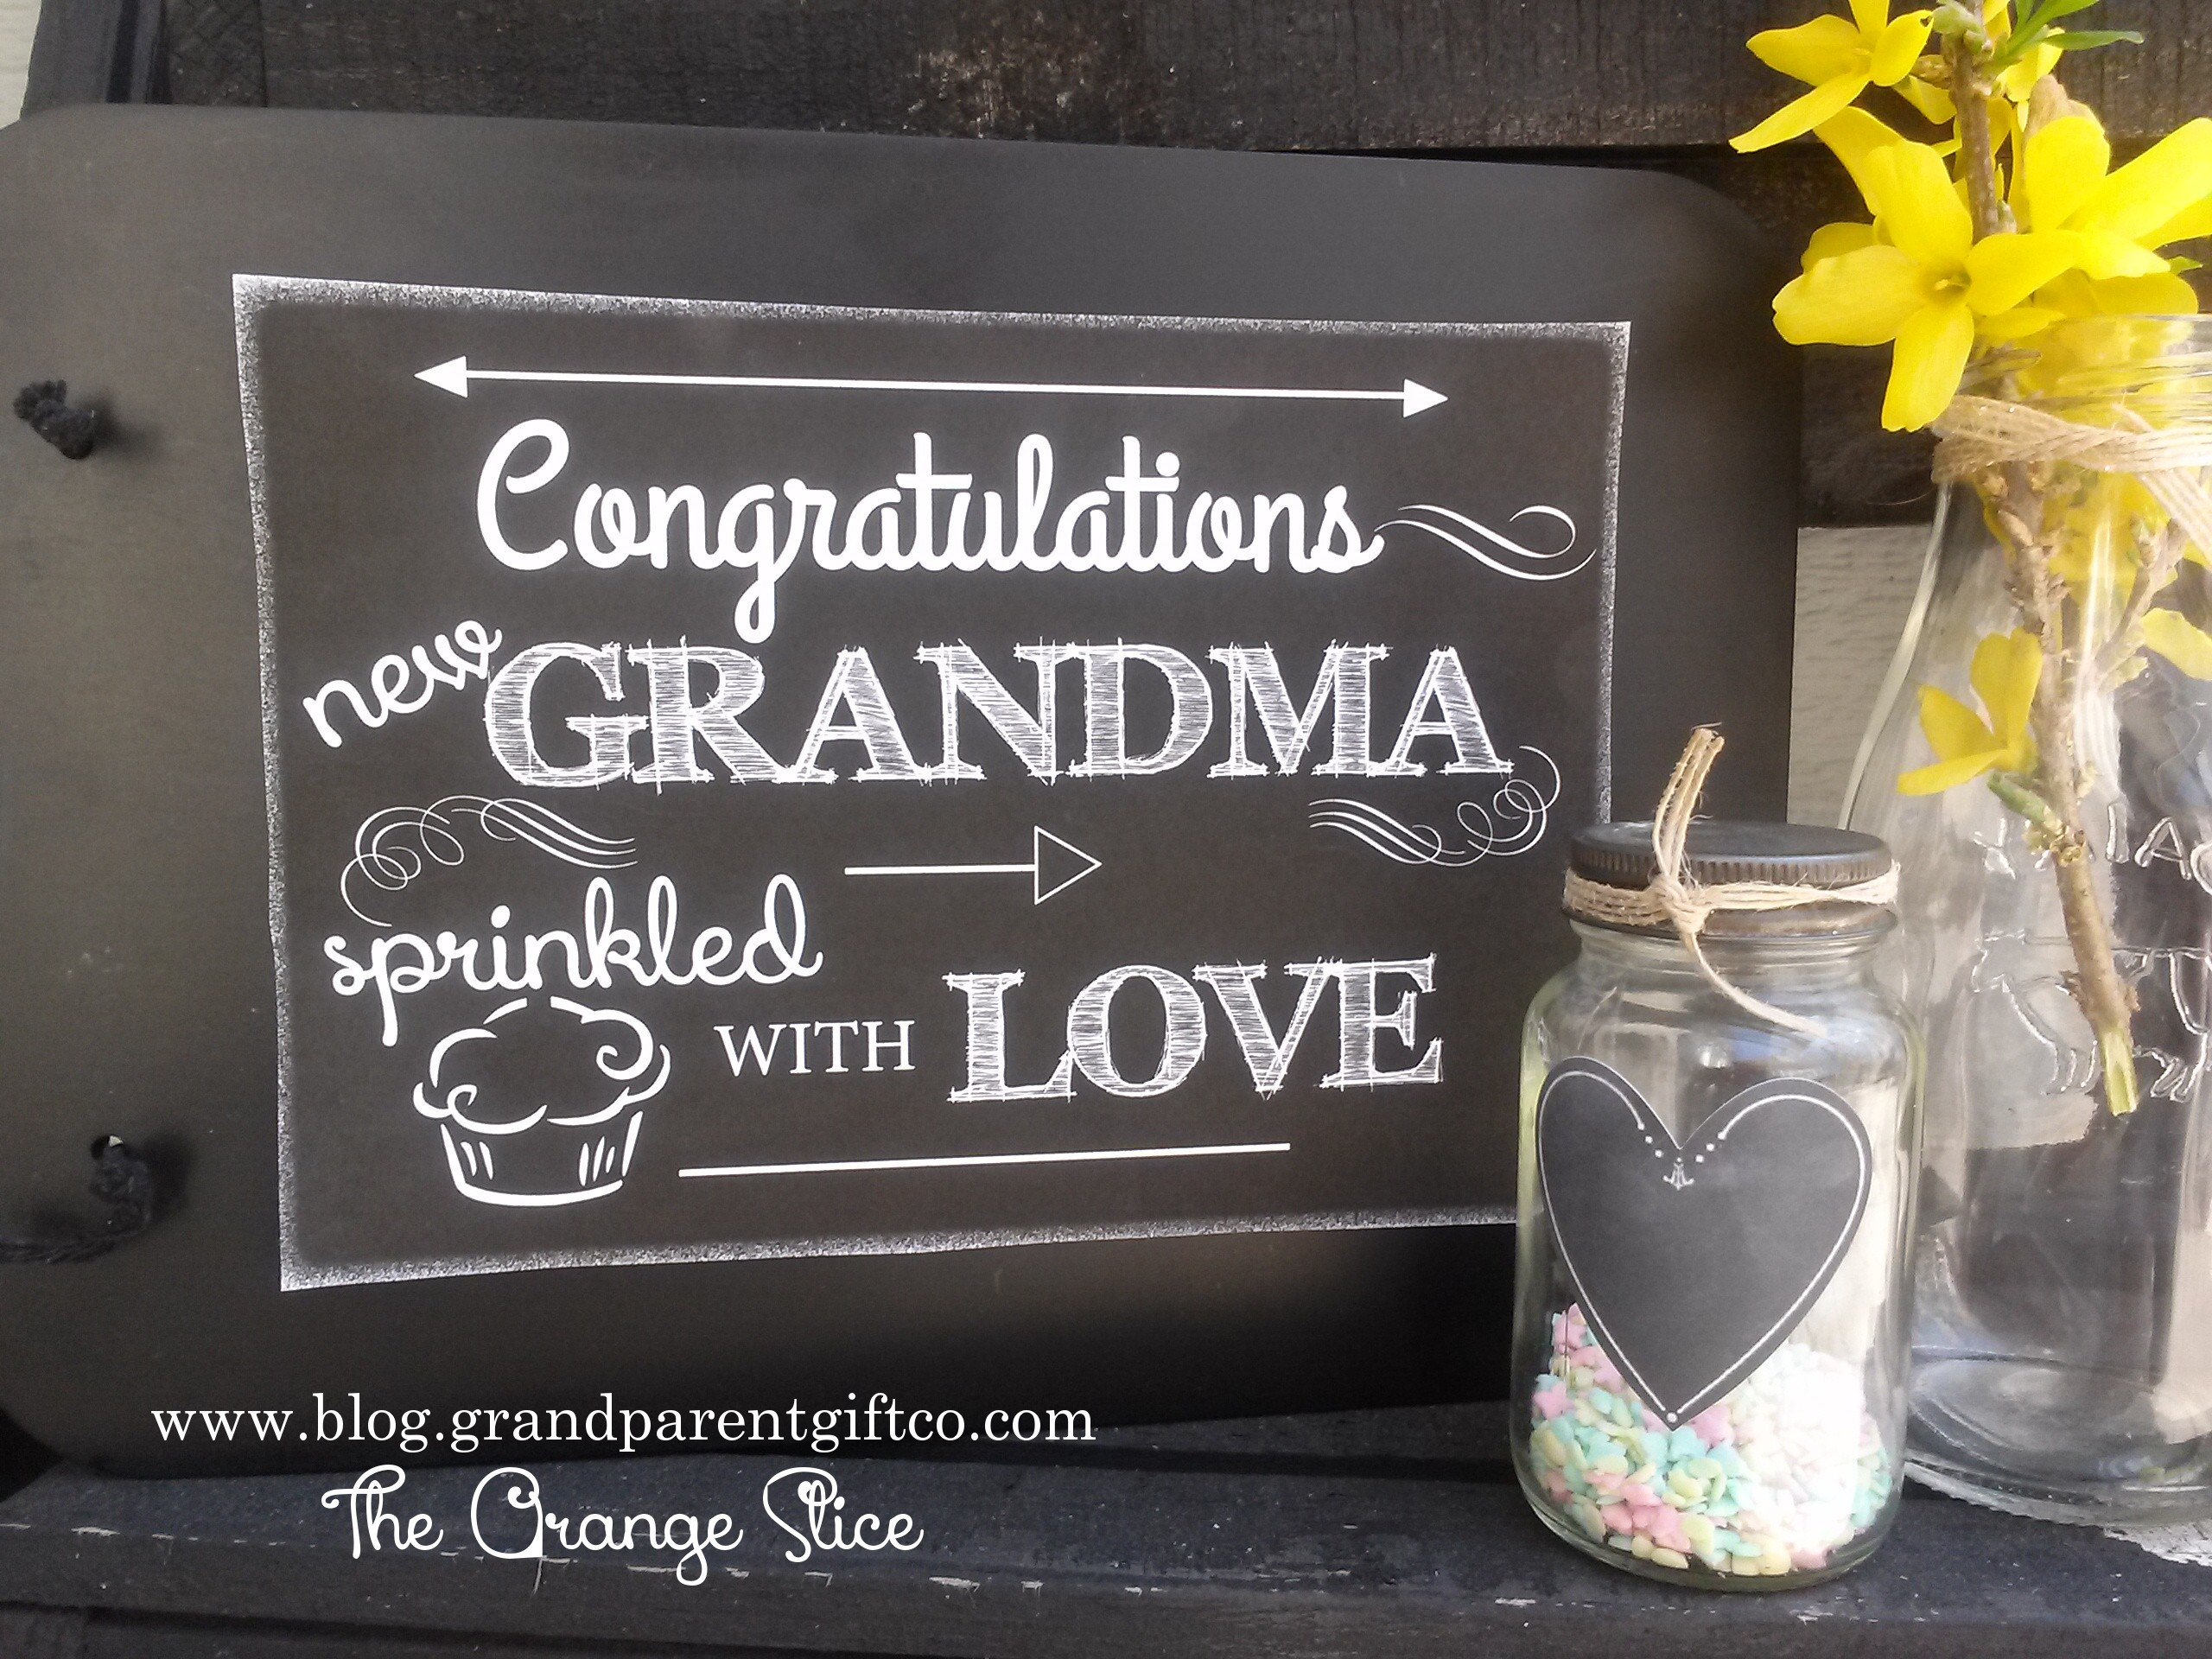 Grandma Baby Shower Gift Ideas
 How to Hold a Grandma Shower The Sprinkle